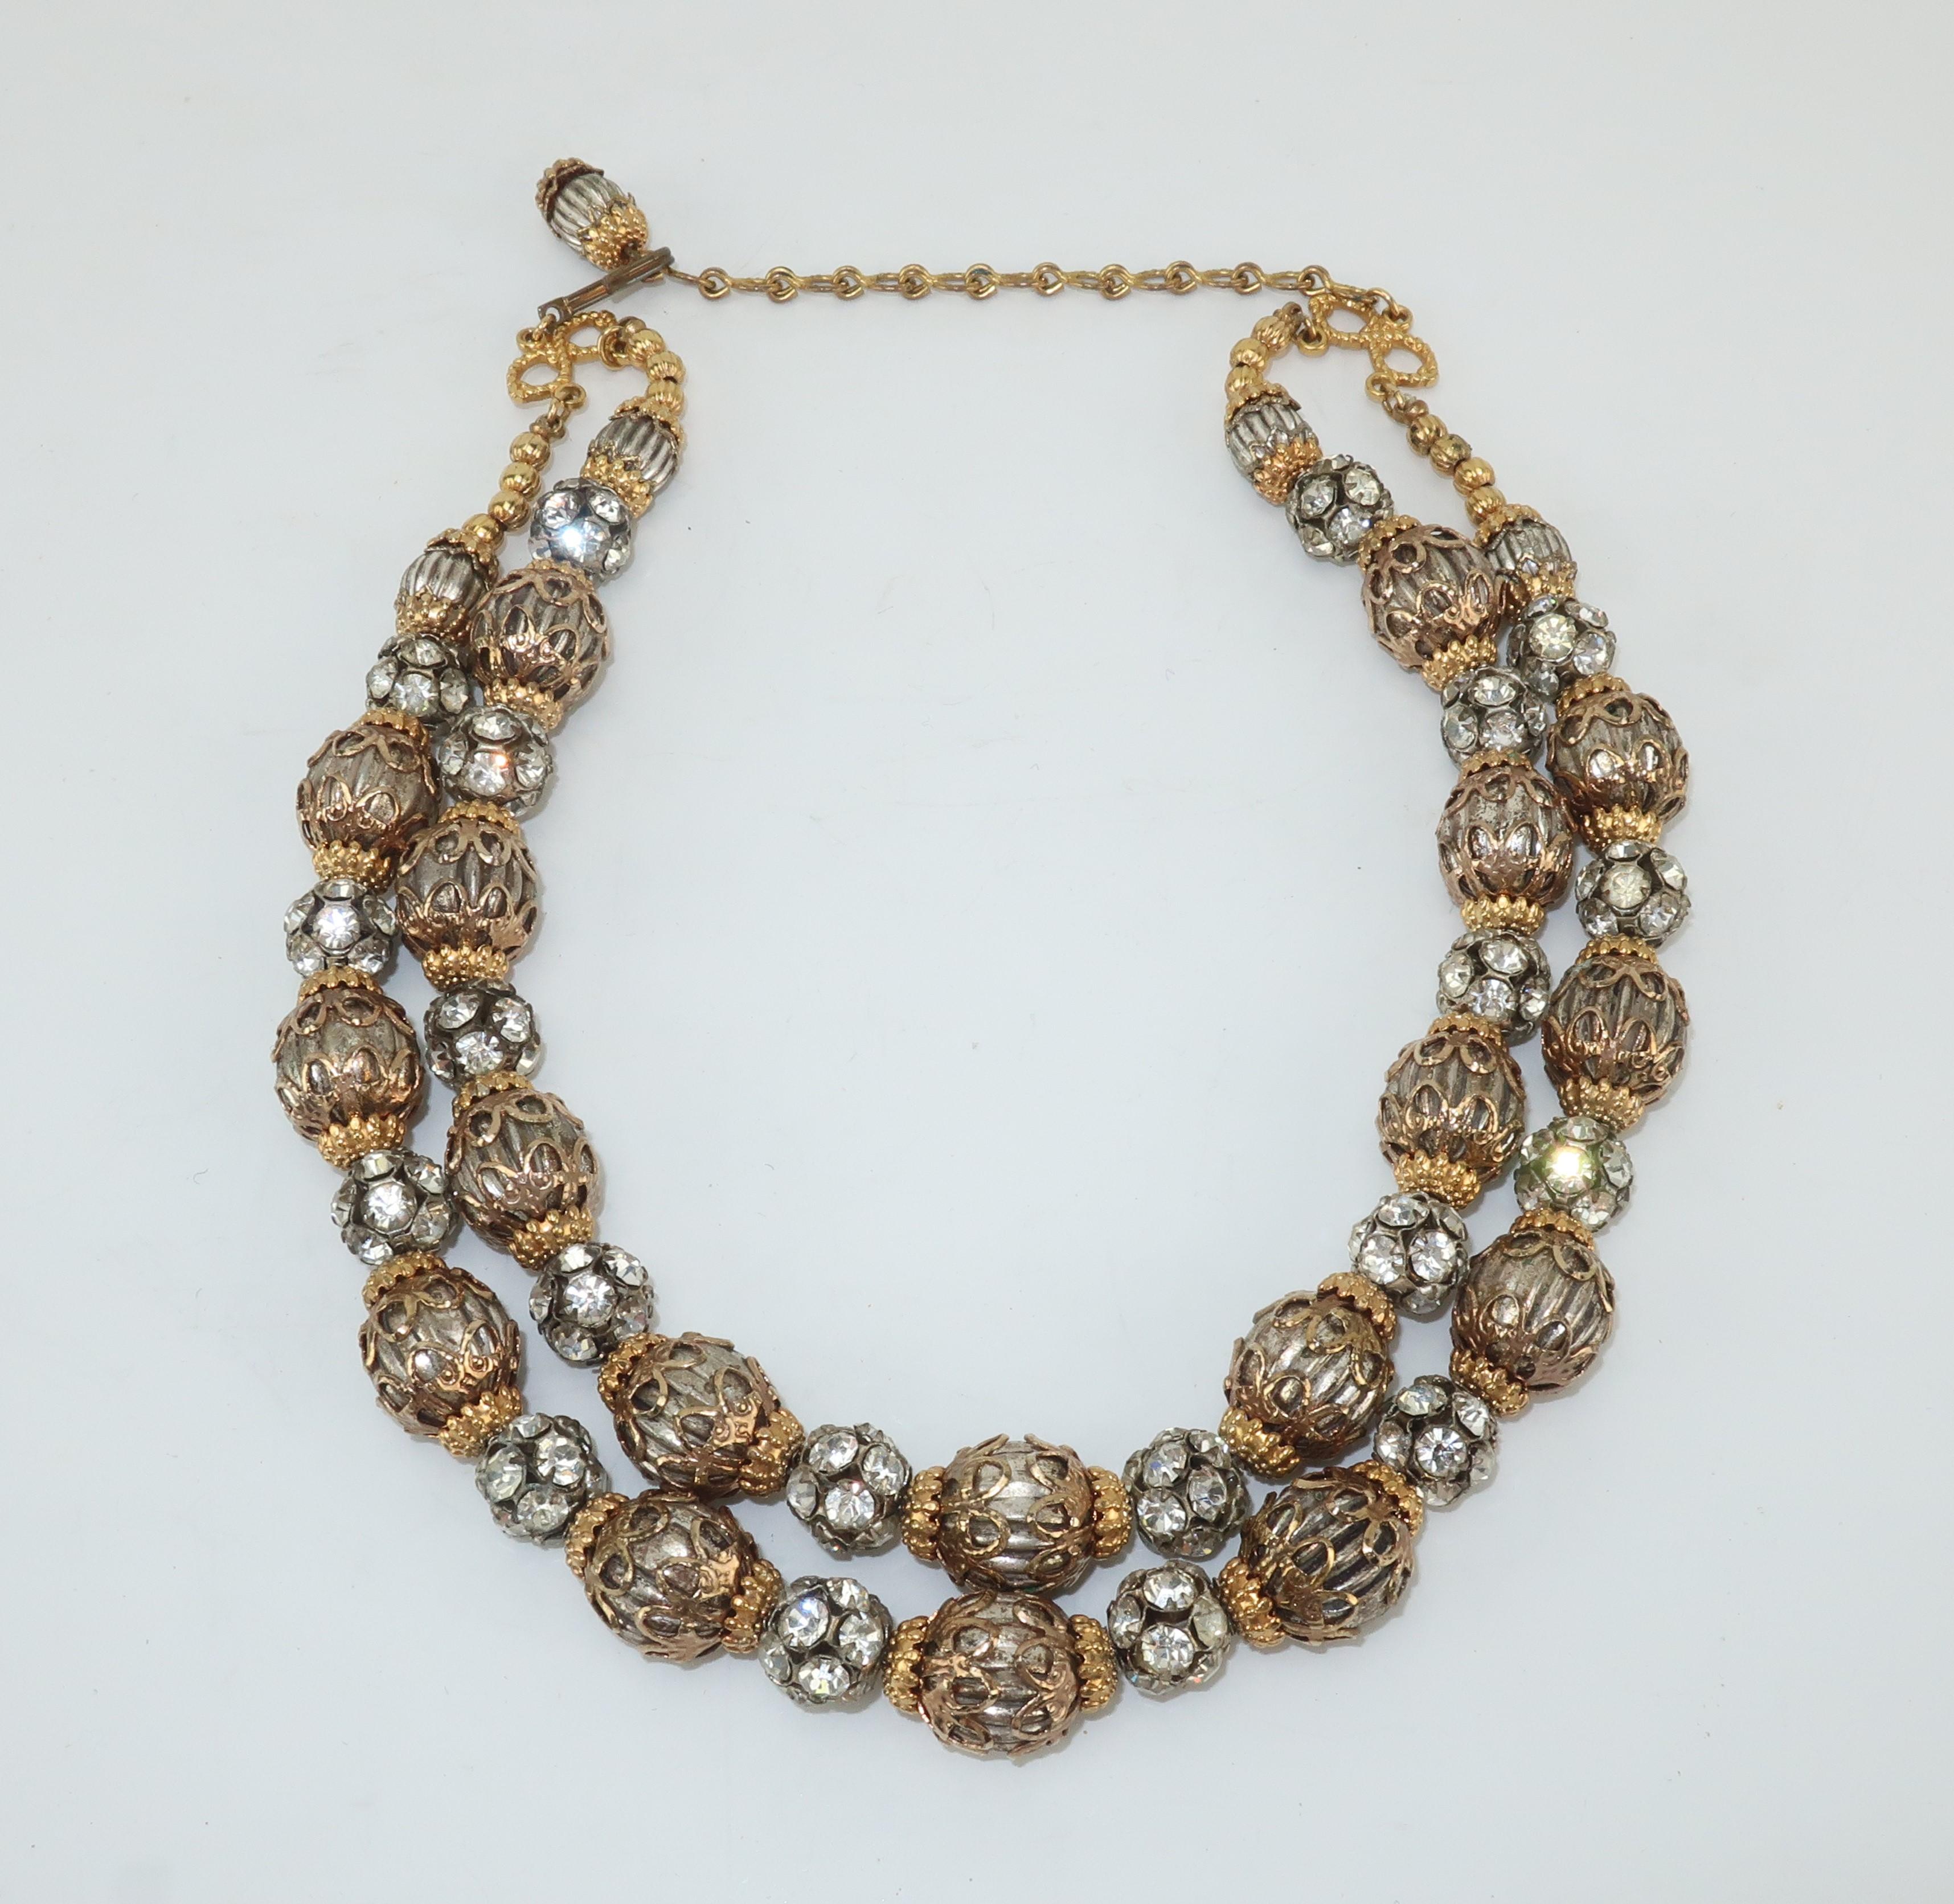 A 1950’s dazzler!  This two stranded necklace consists of silver tone fluted beads with gold tone filigree caps interspersed with rhinestone encrusted beads.  It is outfitted with adjustable hook and chain enabling wear as a choker or short necklace